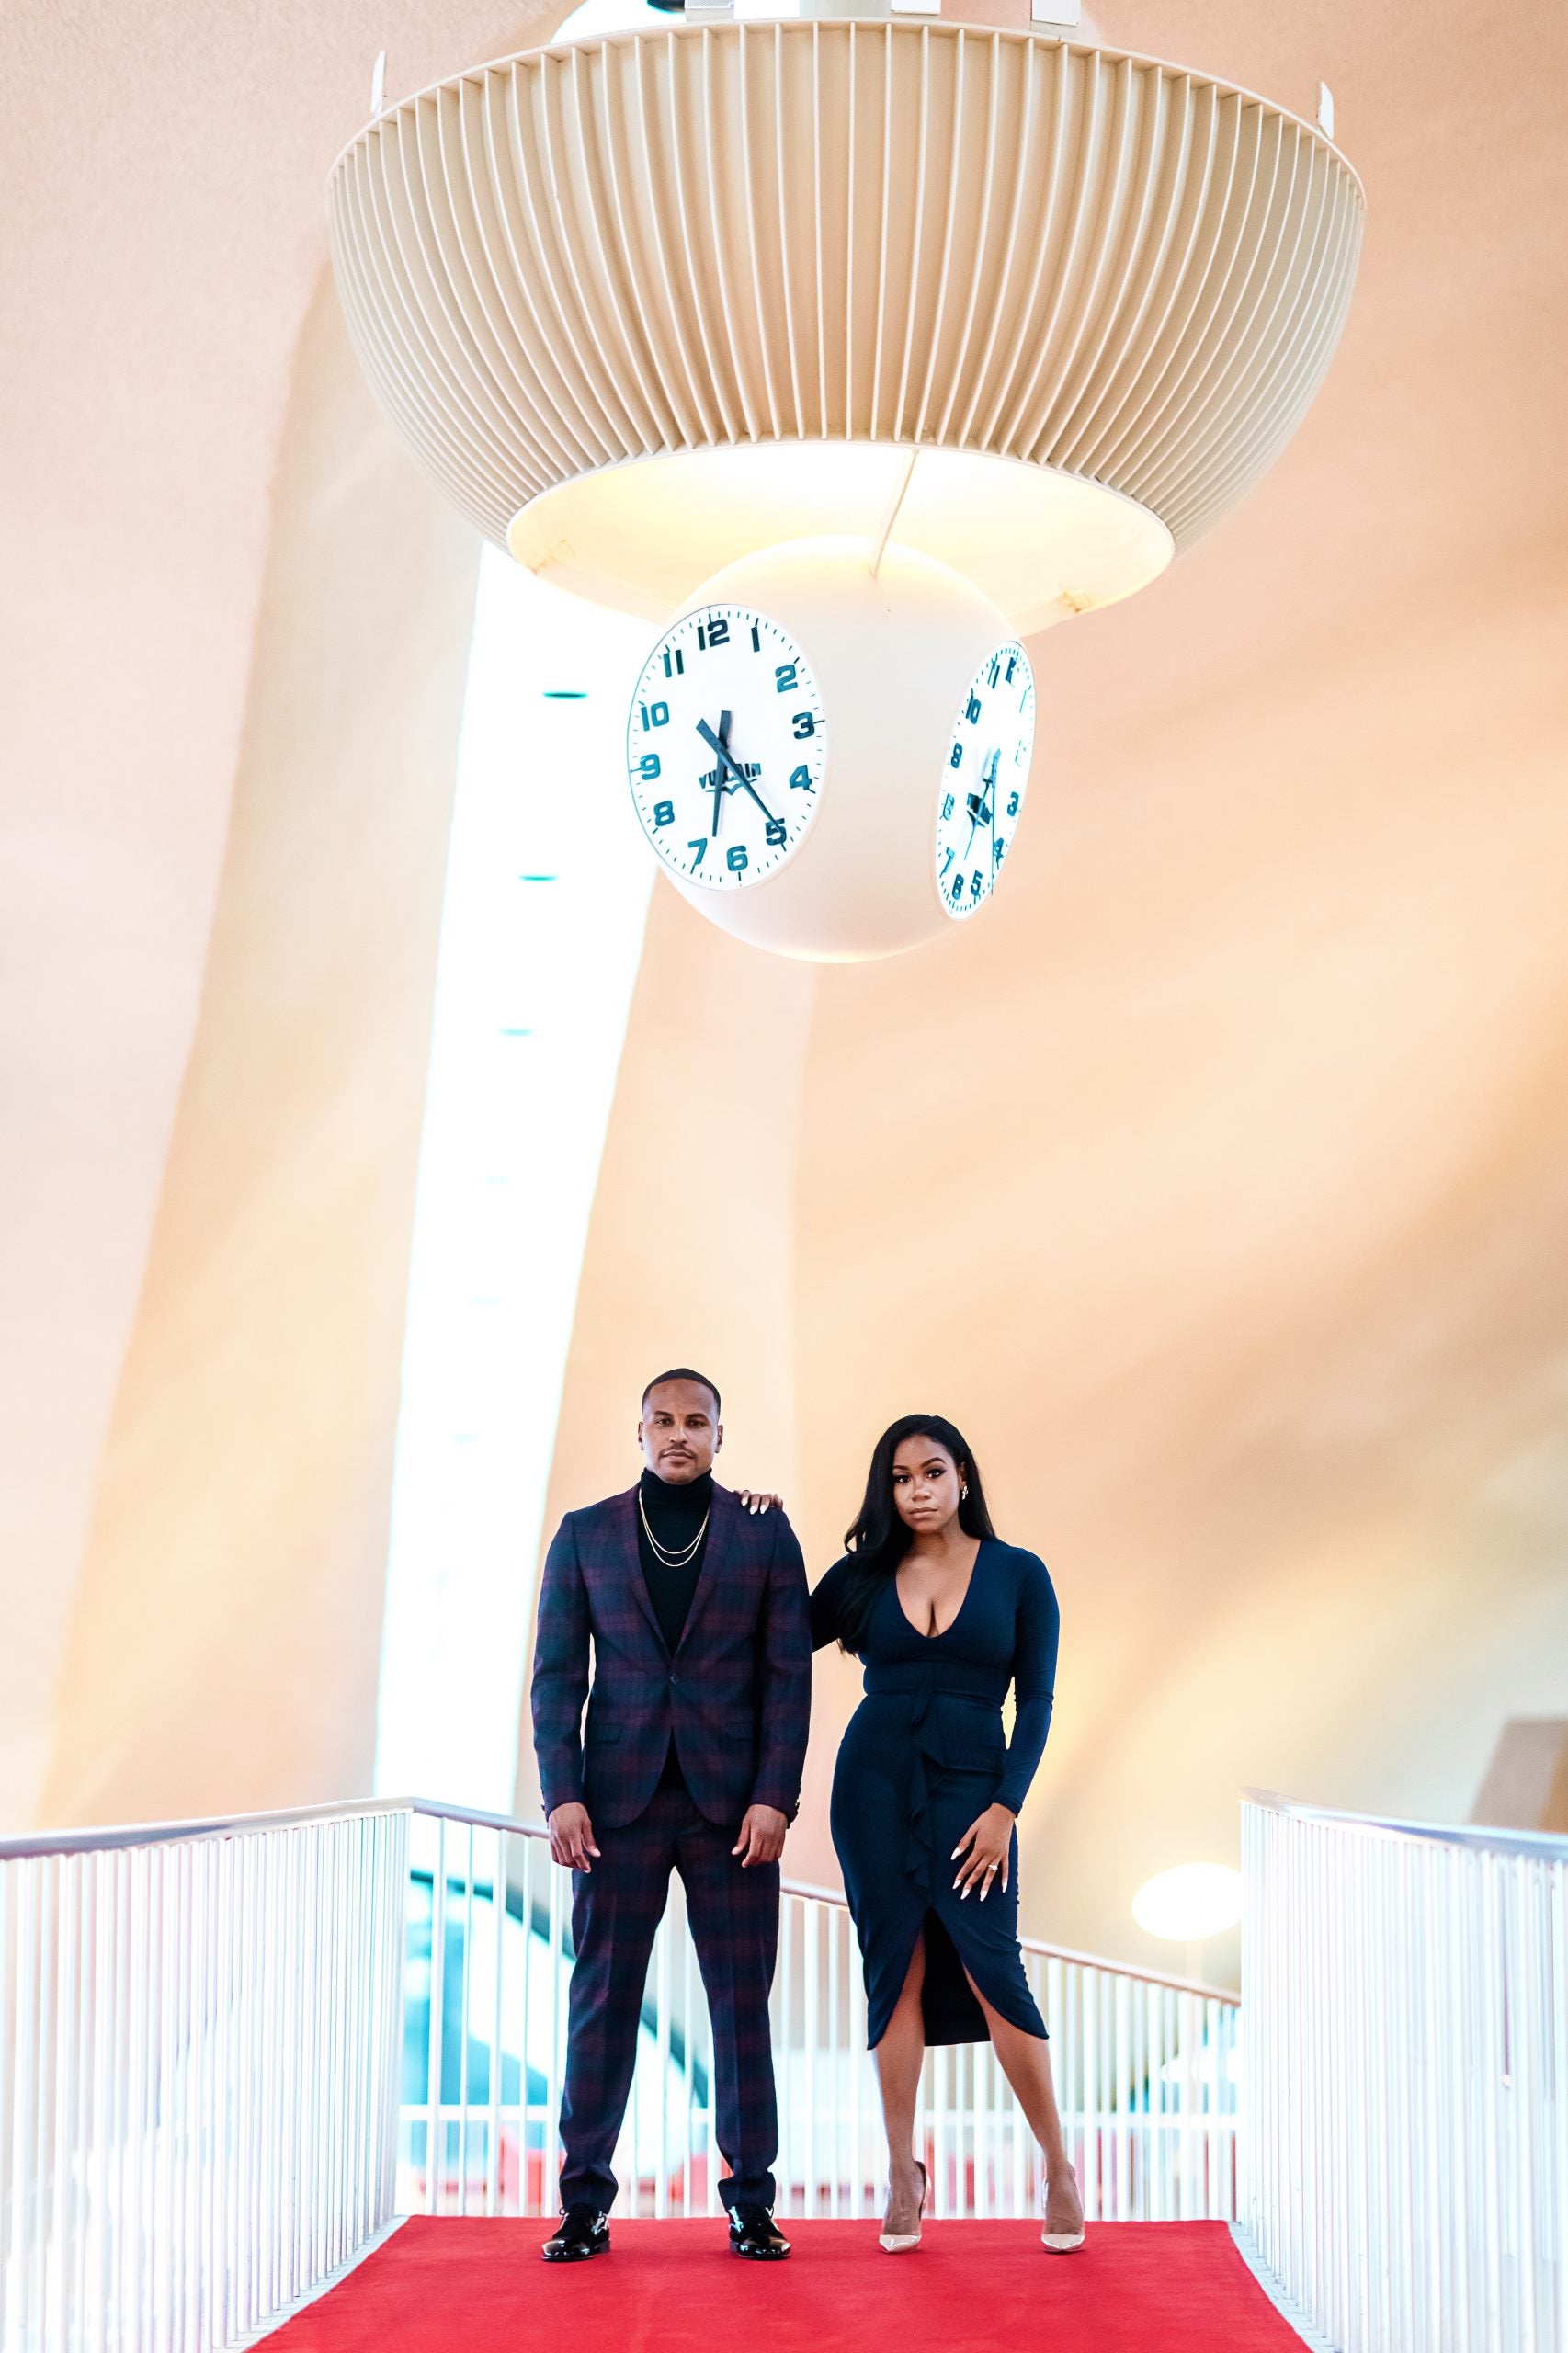 Jahira And Chad Slayed Their Engagement Photo Shoot. Up Next? A Juneteenth Wedding.